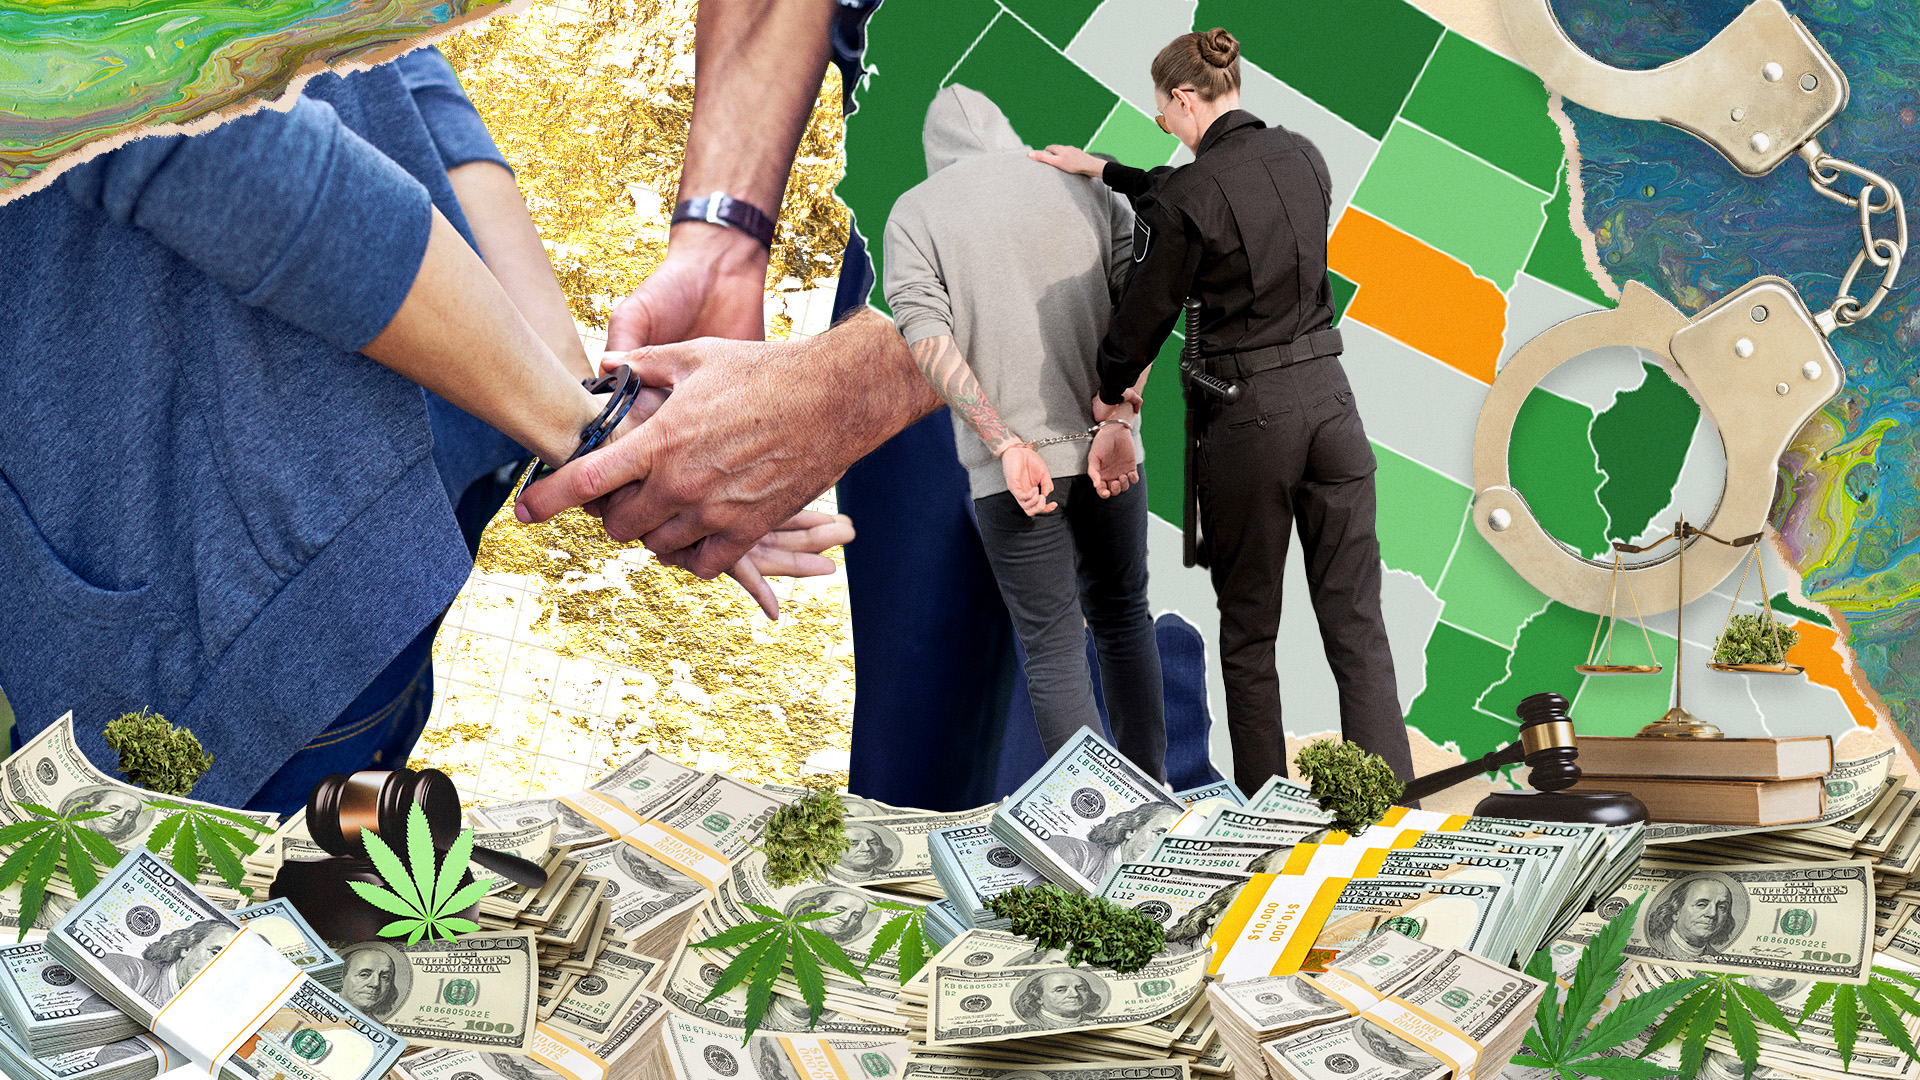 Where Does Money Go From Cannabis Felony Charges?